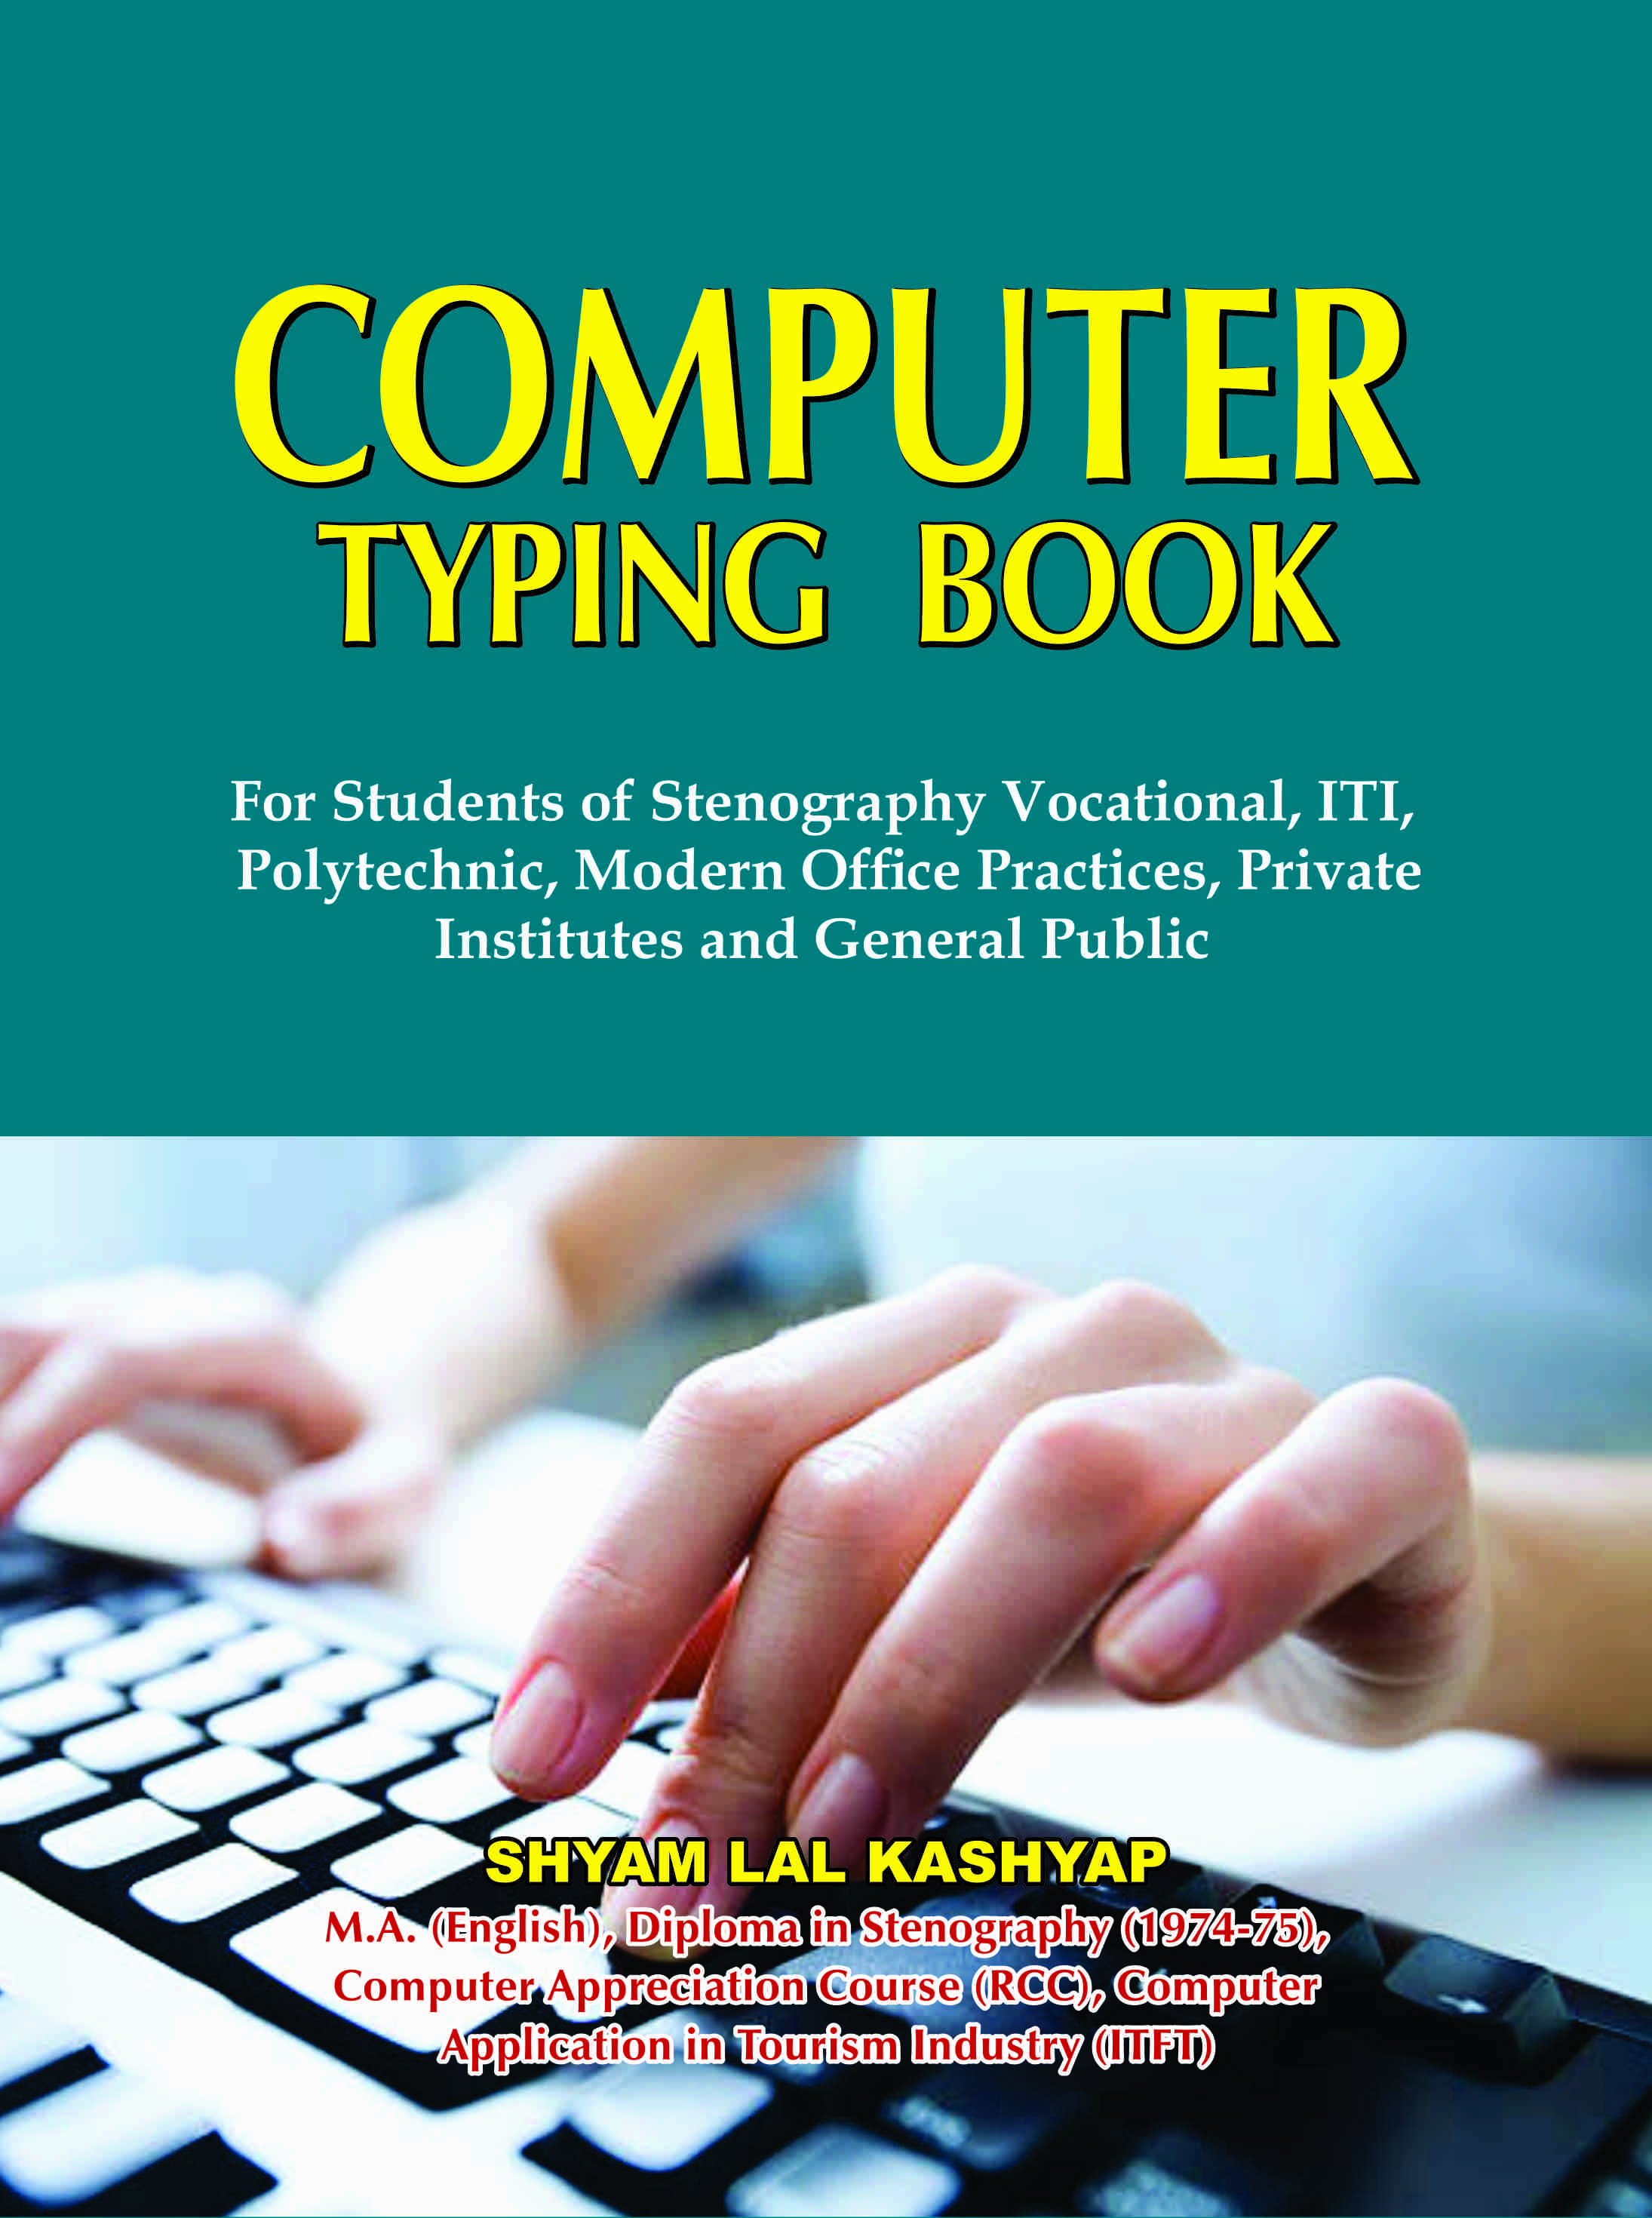 9. Computer Typing Book